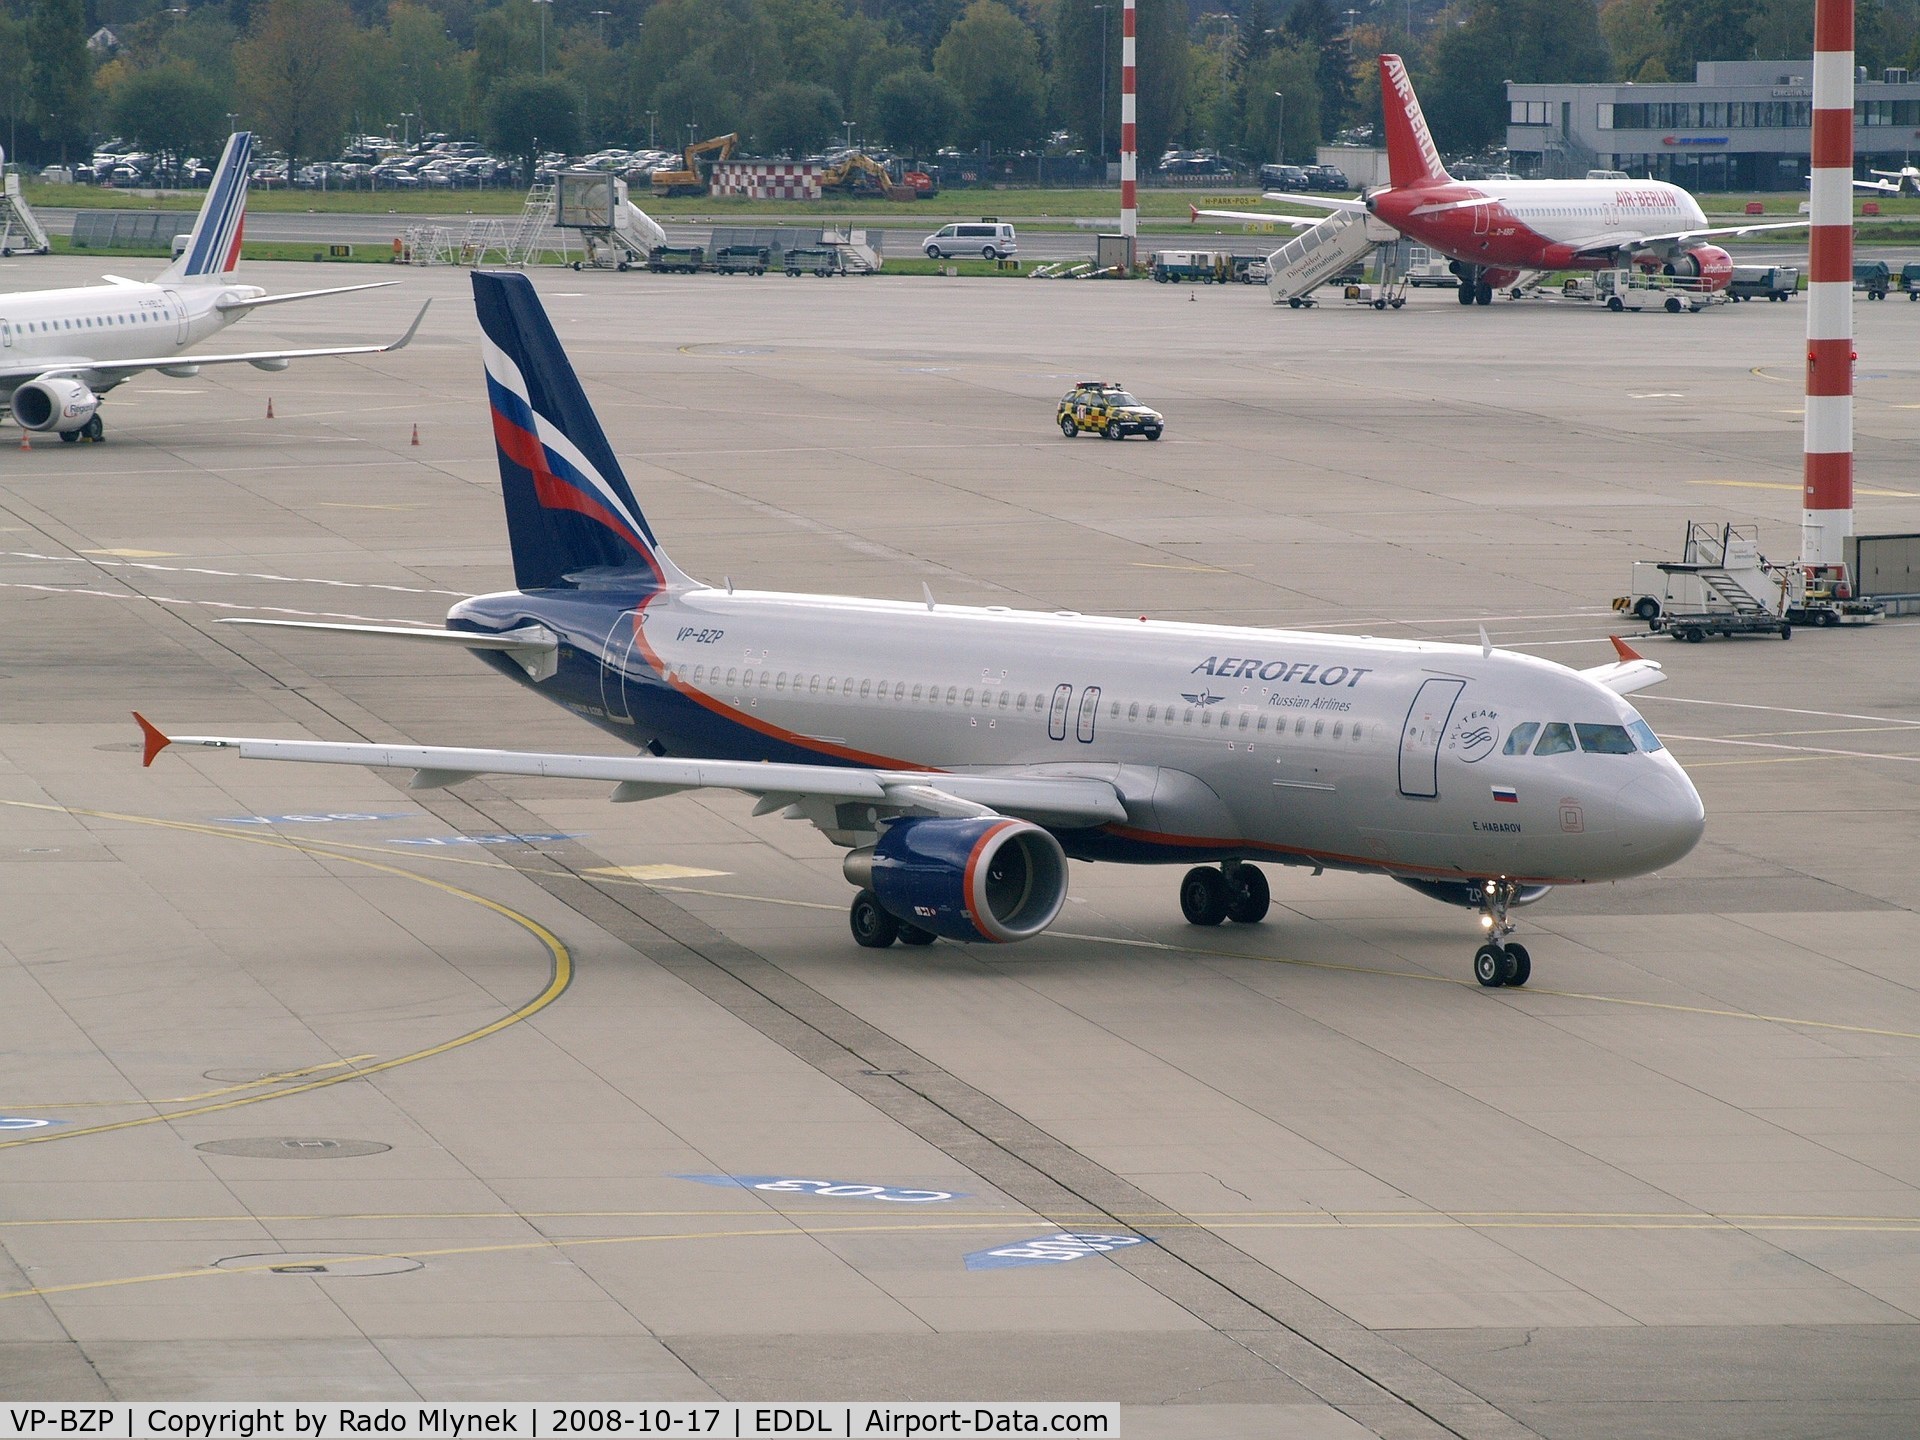 VP-BZP, 2008 Airbus A320-214 C/N 3631, taxying for take-off